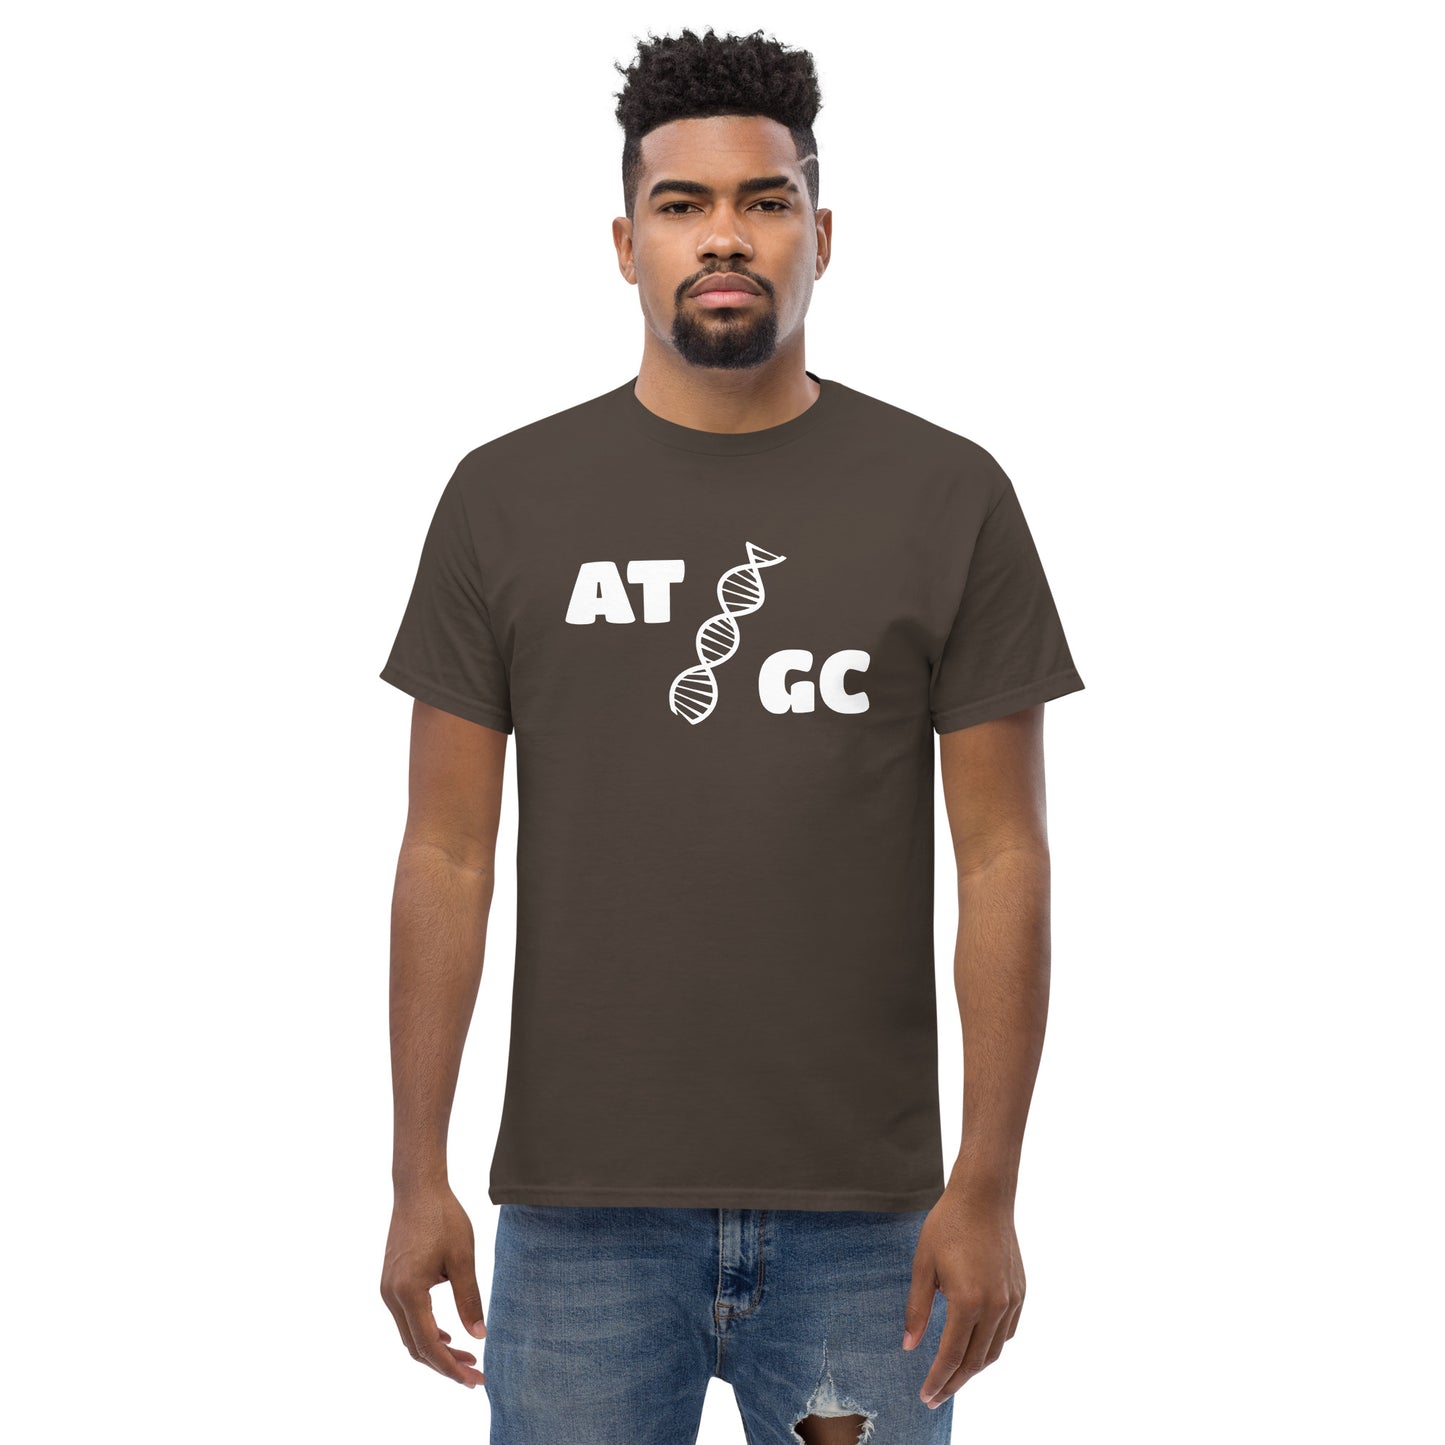 Men with dark brown t-shirt with image of a DNA string and the text "ATGC"